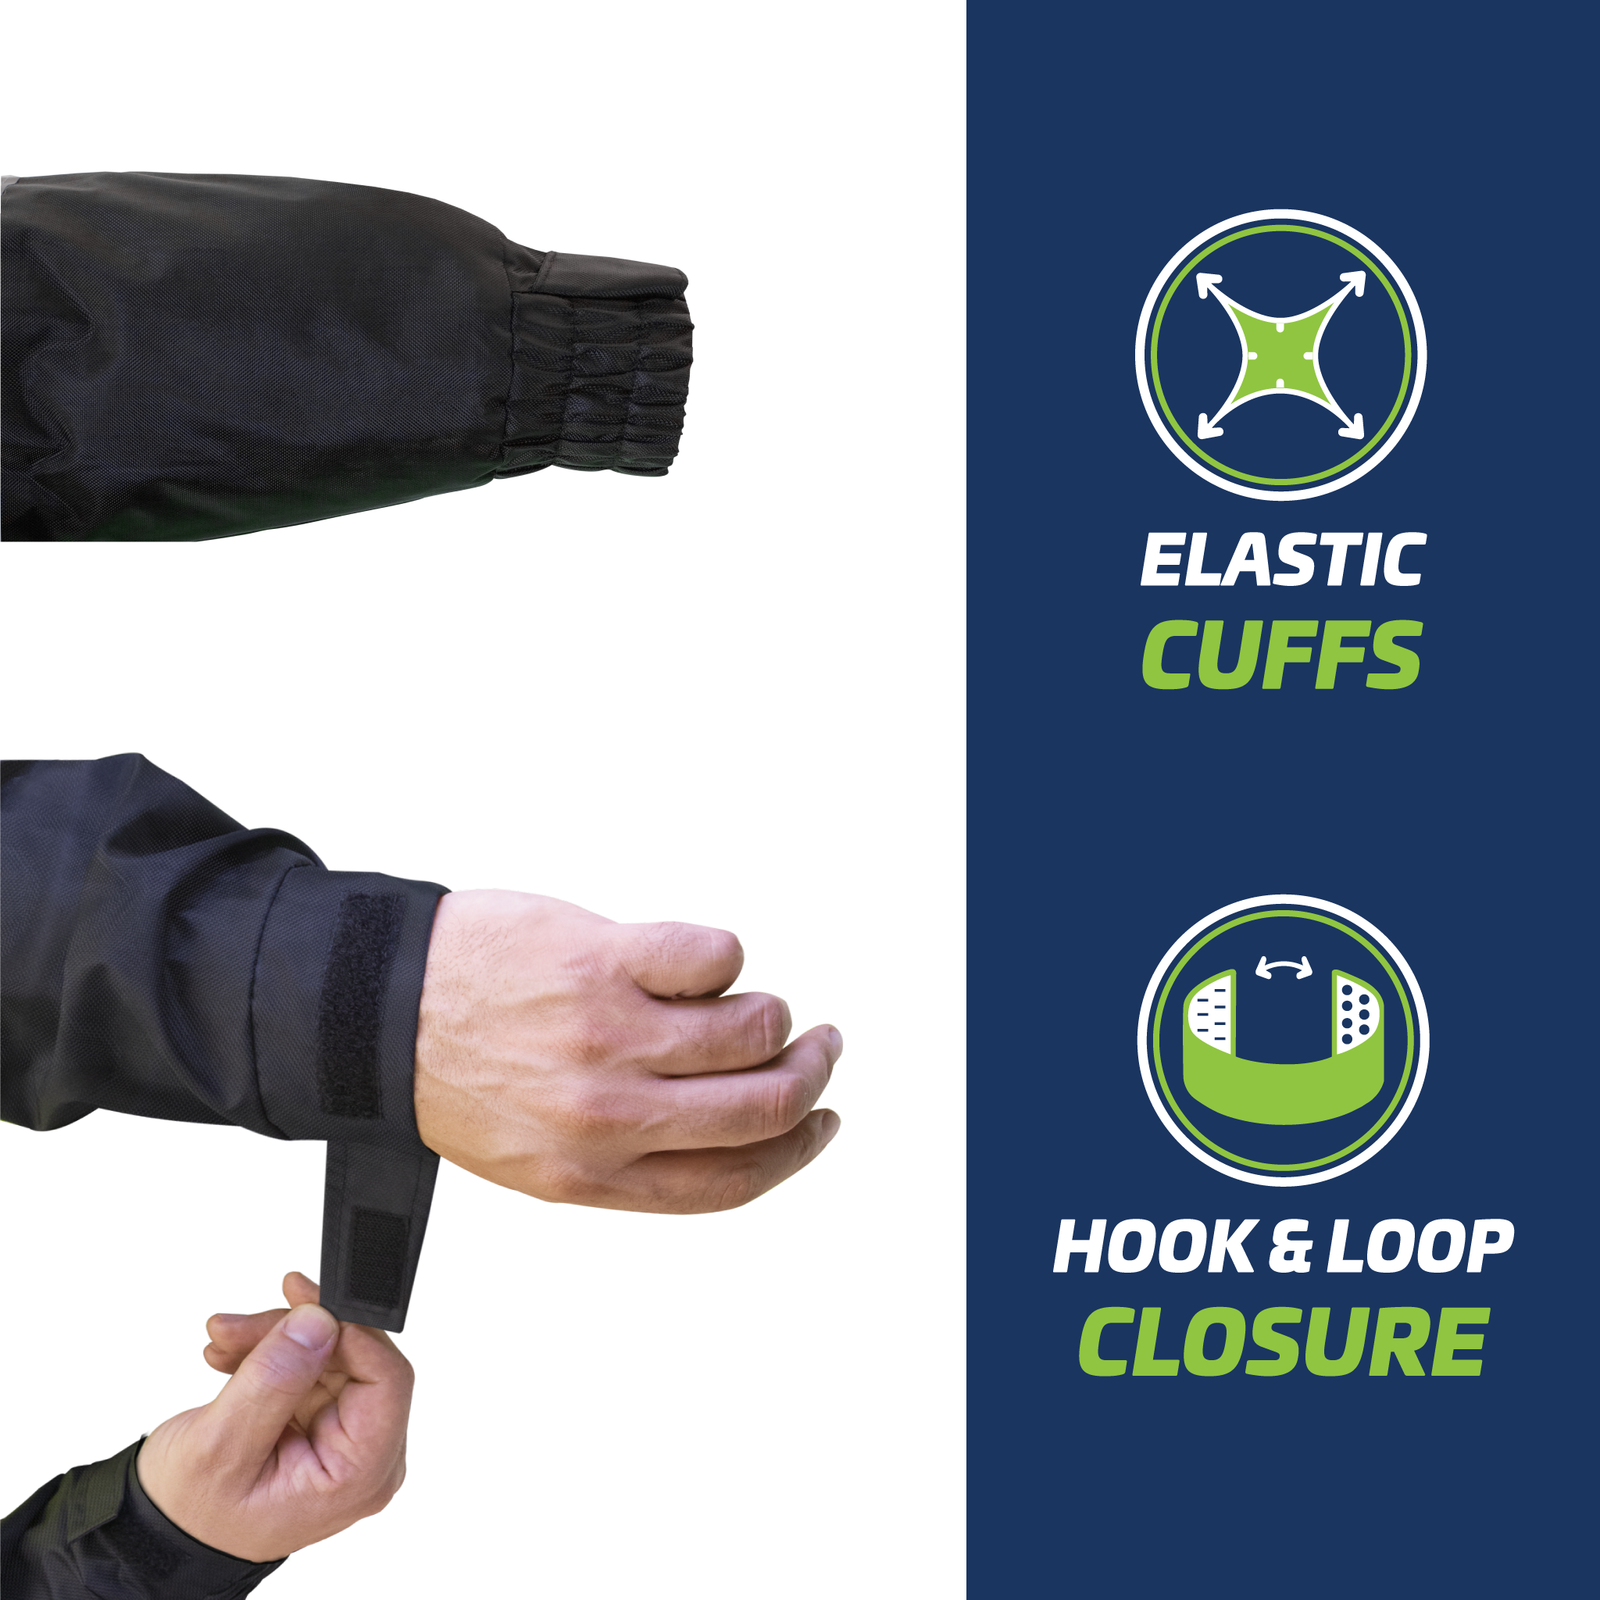 Waterproof hi visibility safety bomber jacket with elastic cuffs and strap closures for size versatility